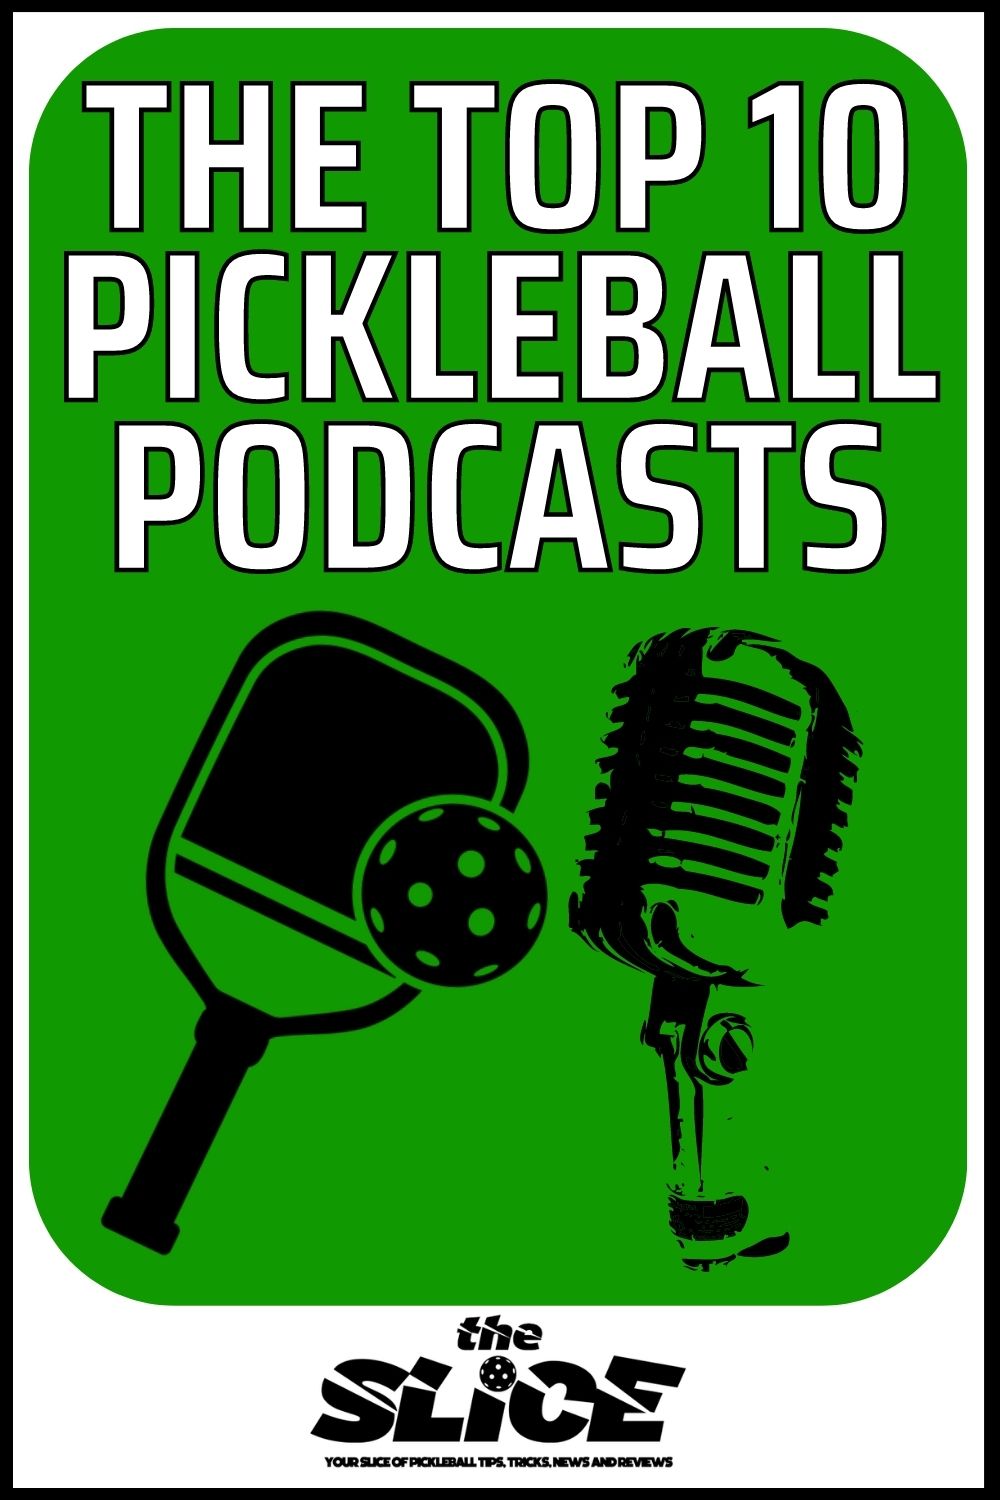 The Top Ten Pickleball Podcasts (1)